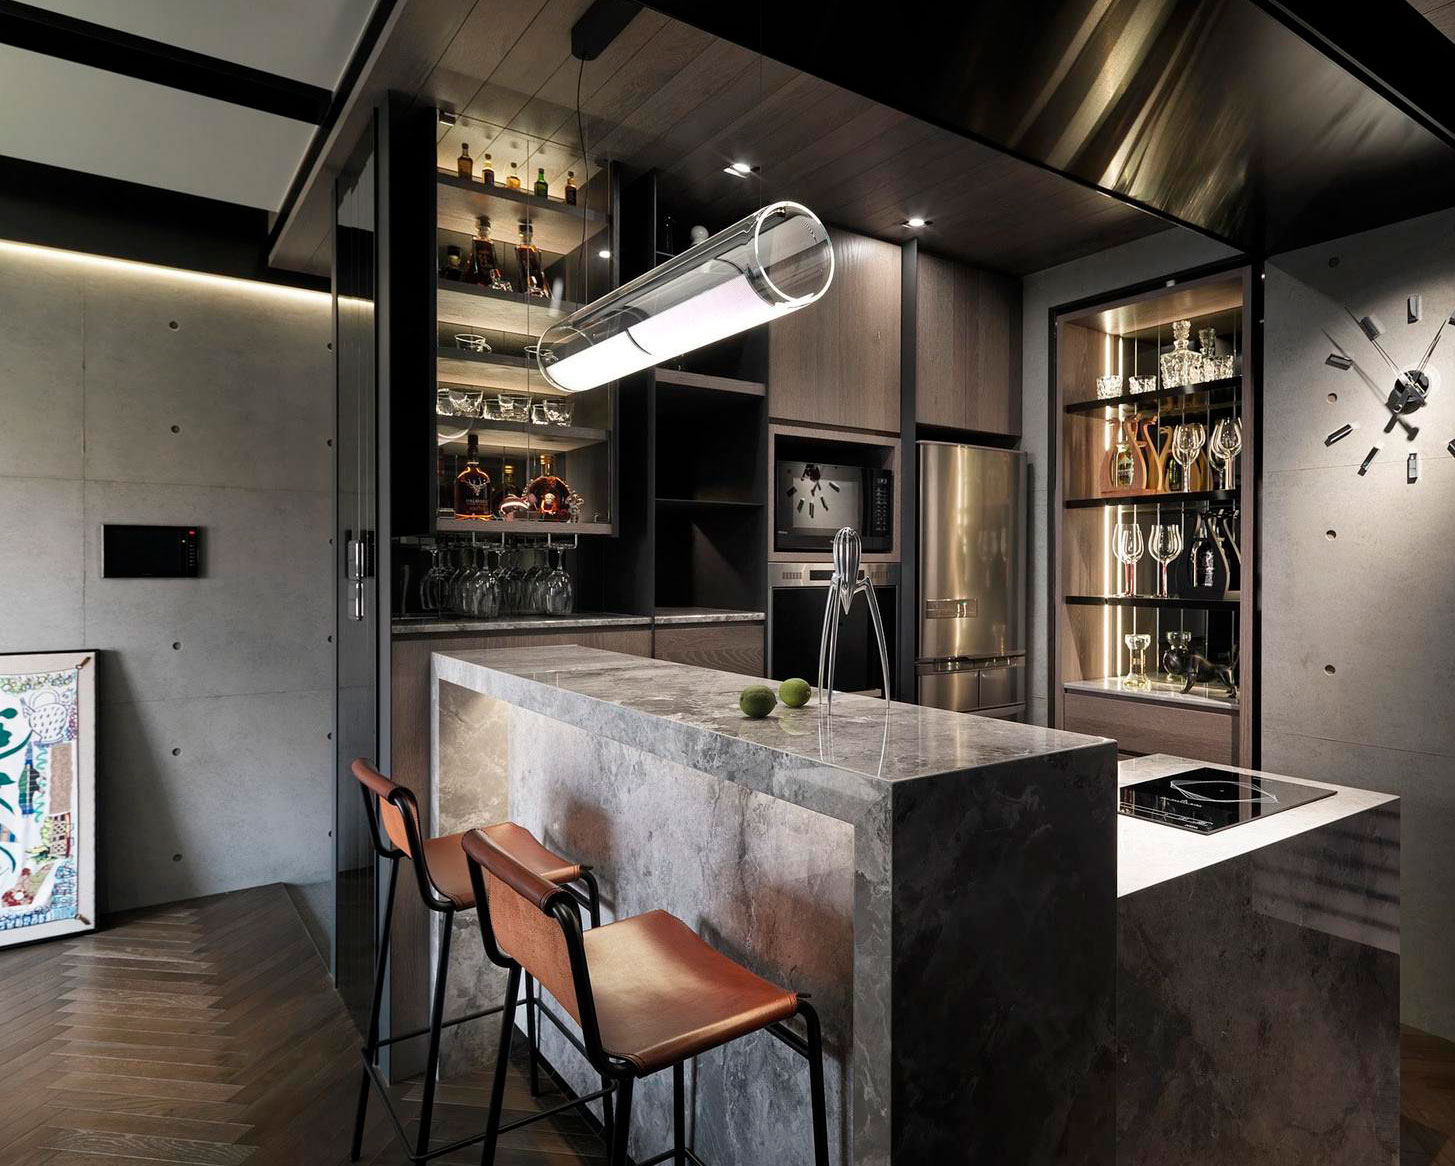 Vibia The Edit - Vibia Lighting Takes Centre Stage in Kitchen Designs - Guise